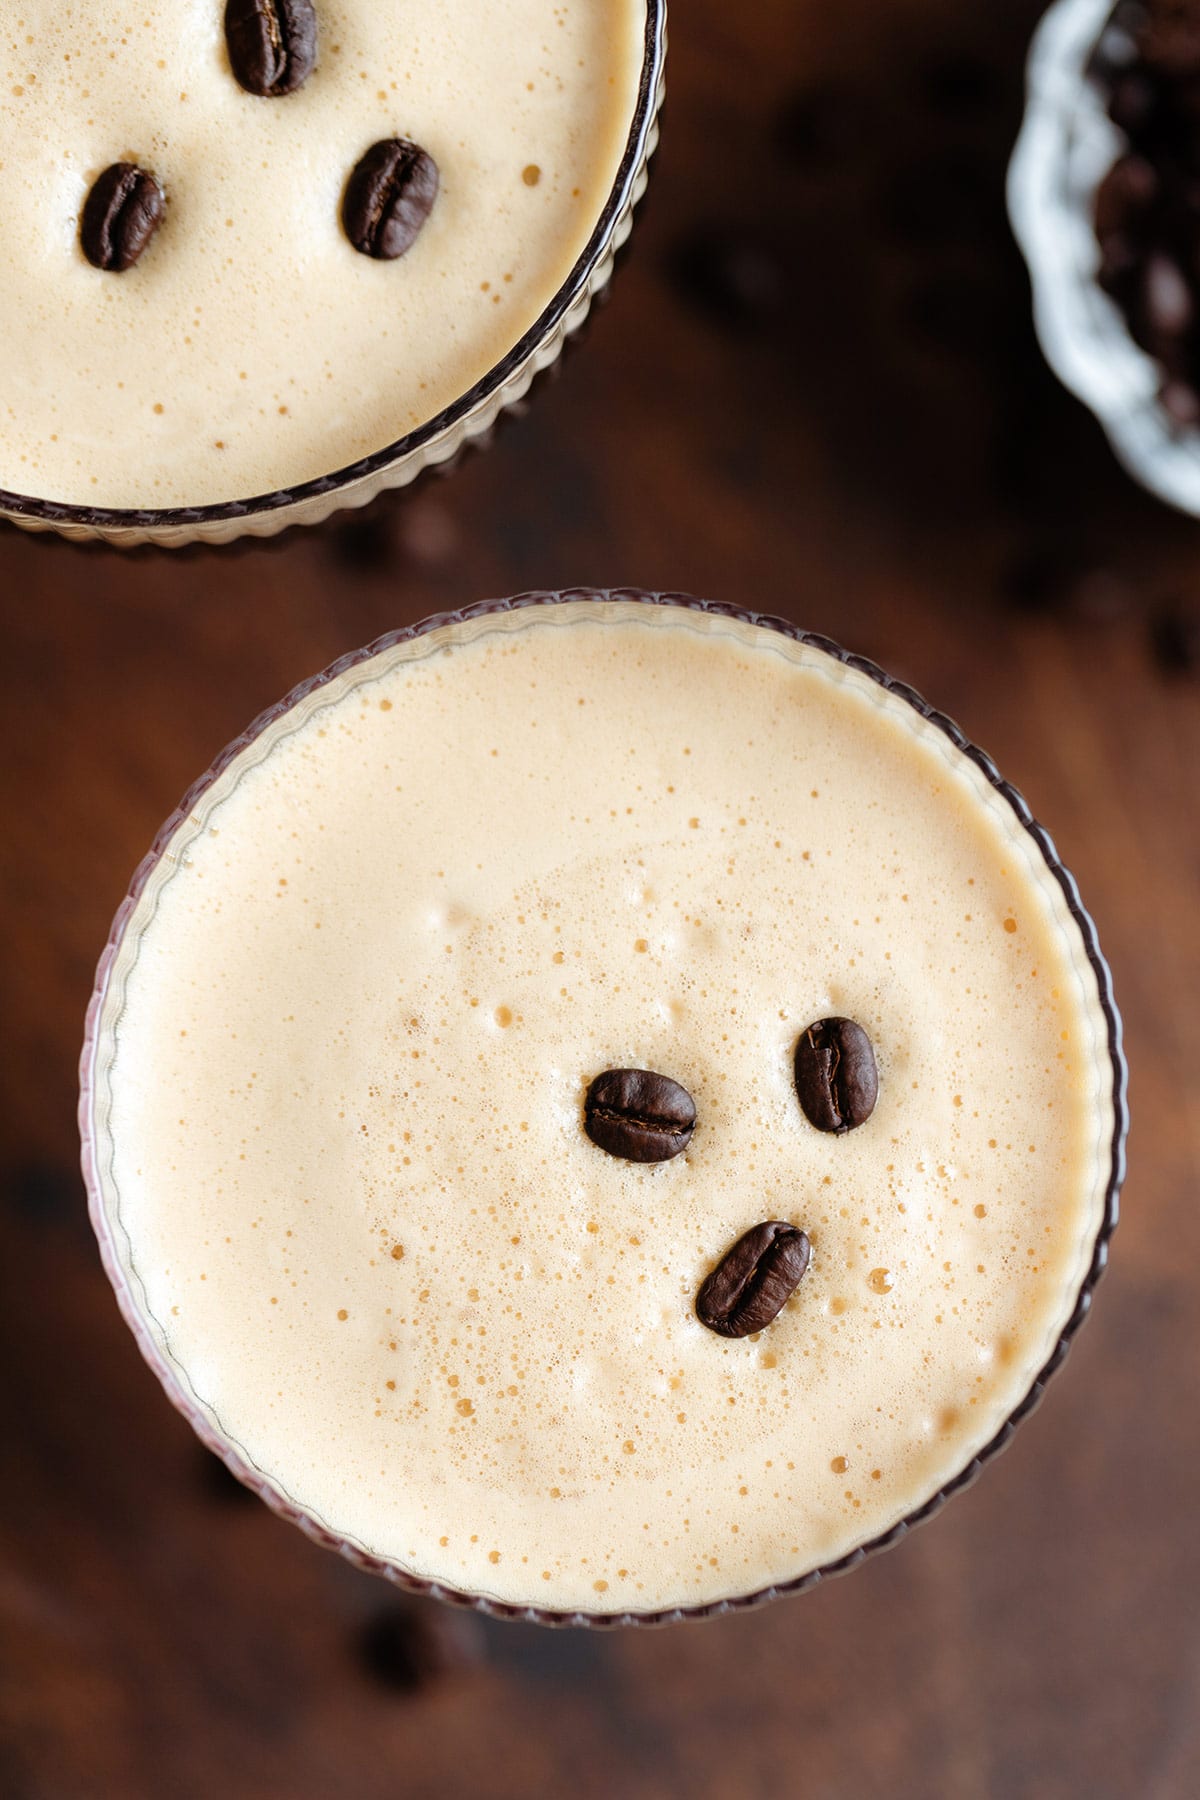 Espresso martini in a wide glass from above with only the foam visible garnished with three coffee beans.